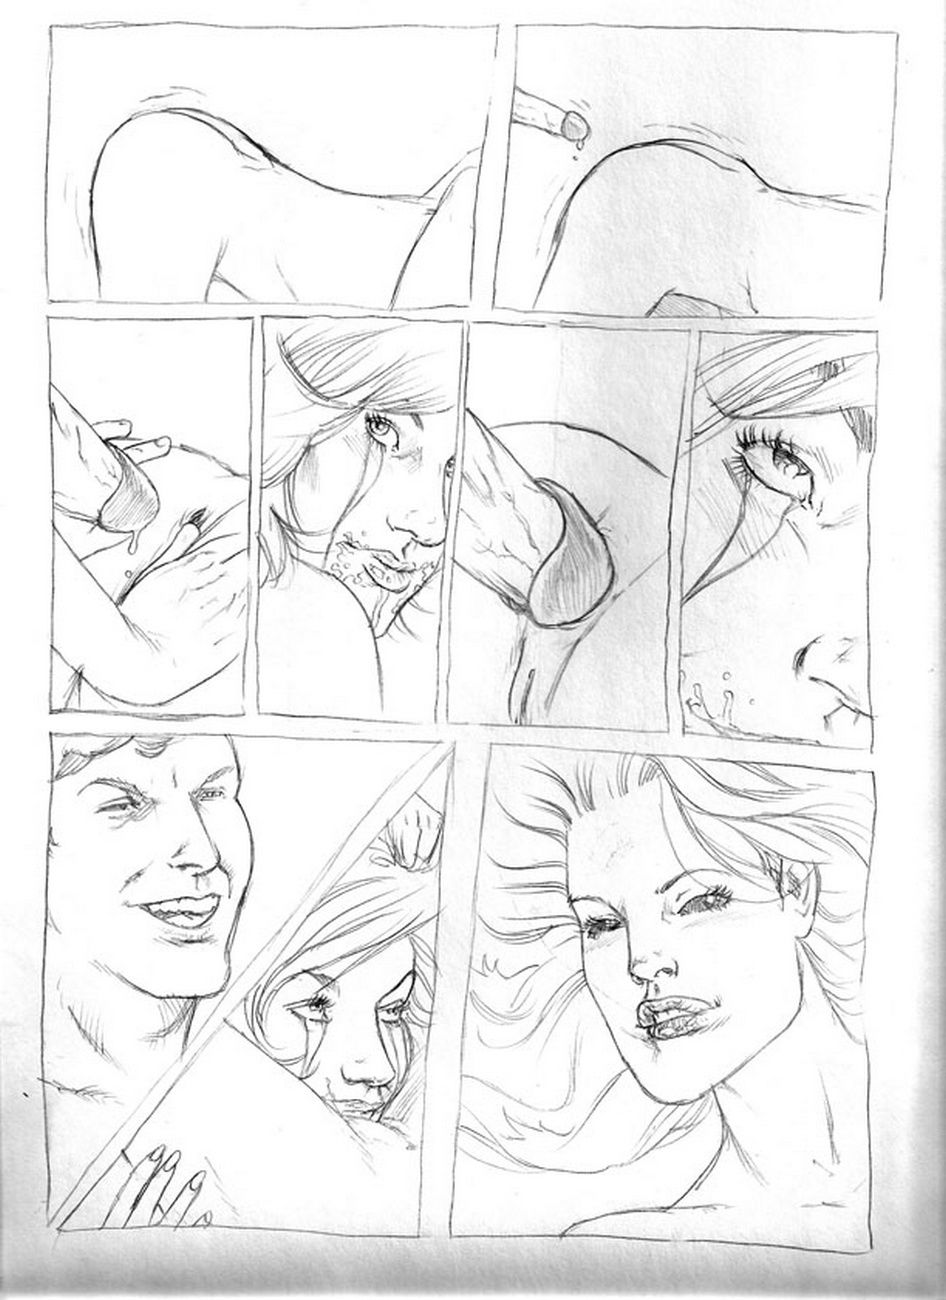 Submission Agenda 5 - The Invisible Woman page 31.